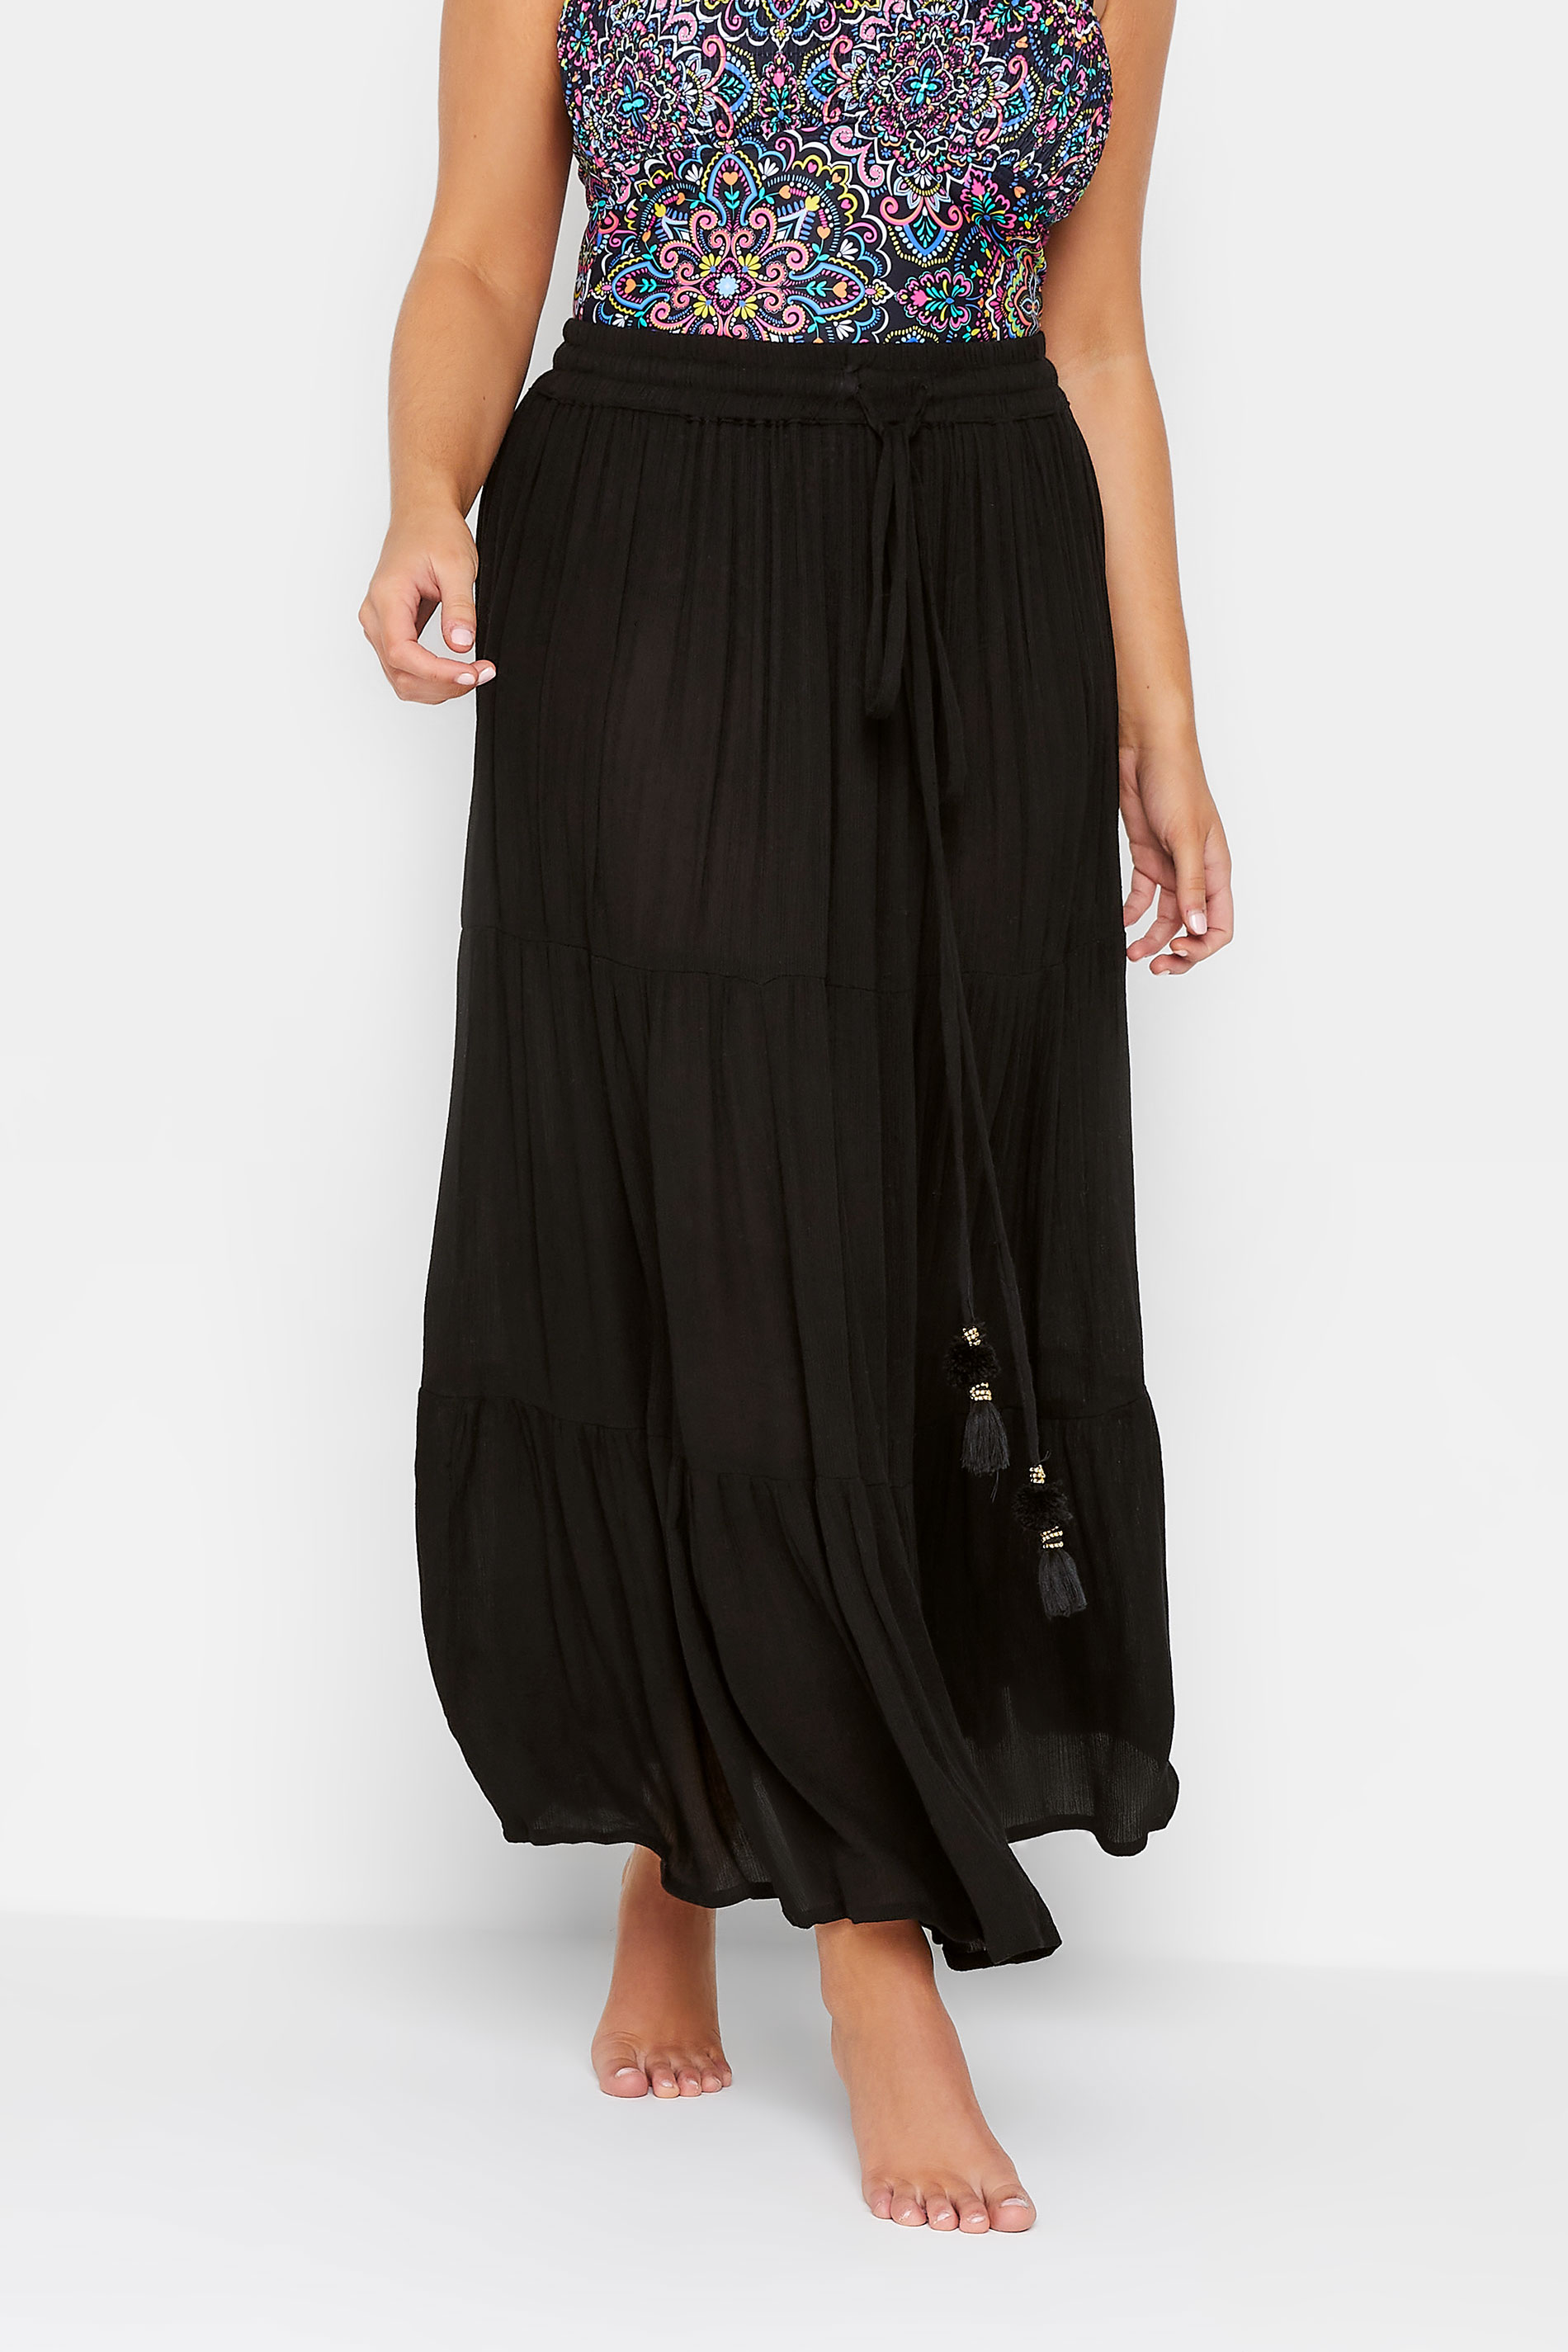 YOURS Curve Plus Size Black Tiered Beach Skirt | Yours Clothing  1